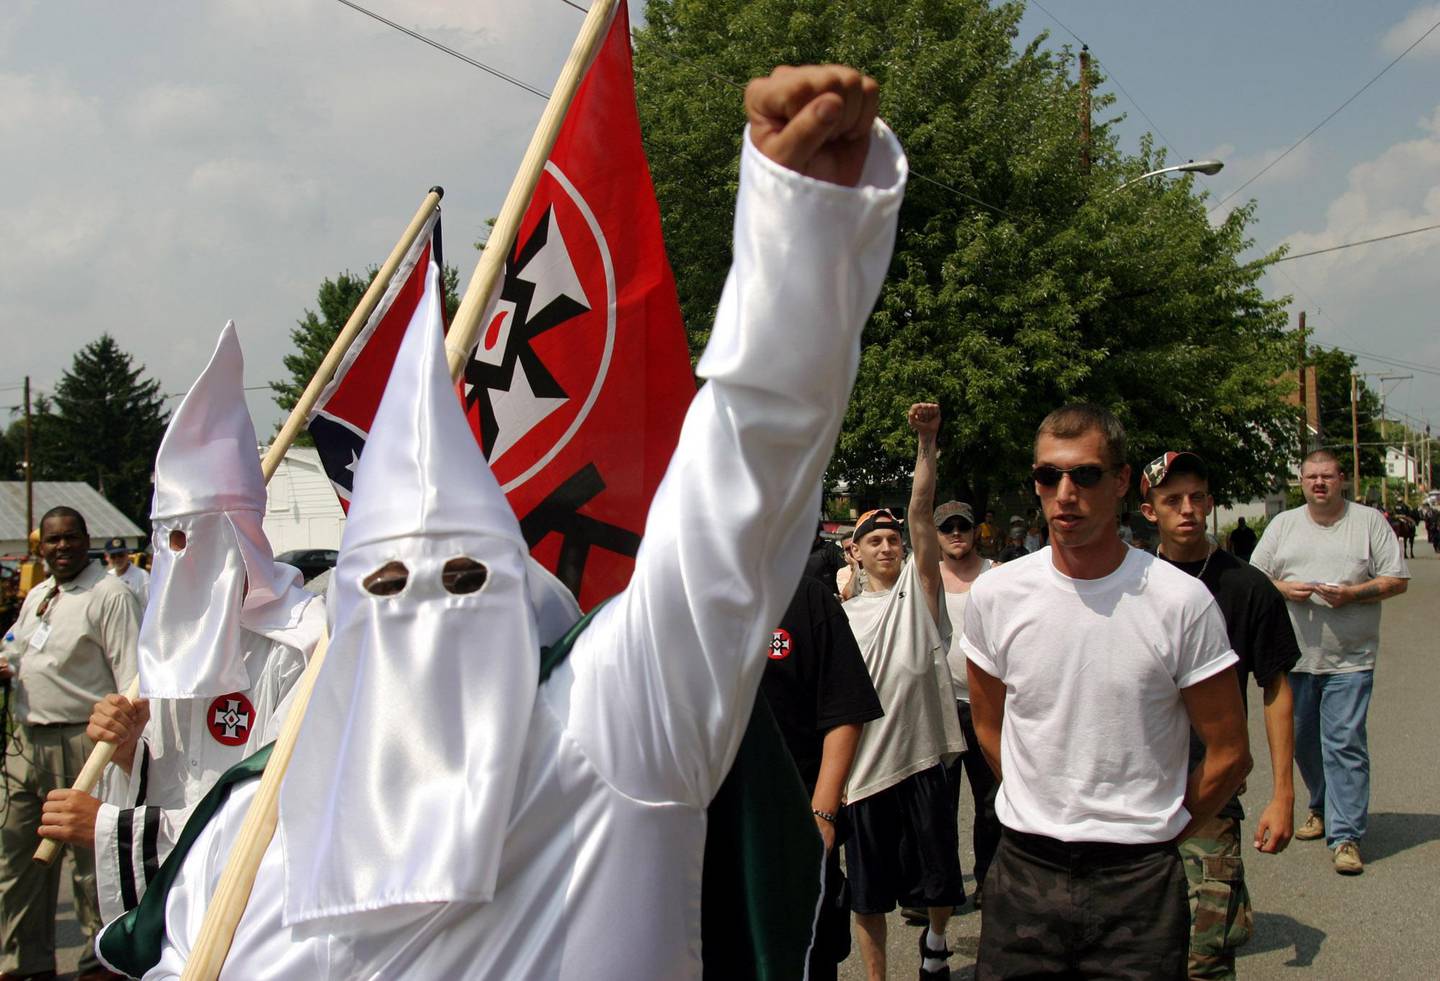 Members of the World Knights of the Ku Klux Klan as they march along a street, Saturday, Aug. 28, 2004, in Sharpsburg, Md. The participants in the march were outnumbered by more than two dozen police in riot gear who kept the Klansmen away from scores of people gathered in a downtown intersection. The police escorted the marchers to a city park, but kept the public away. (AP Photo/Timothy Jacobsen)